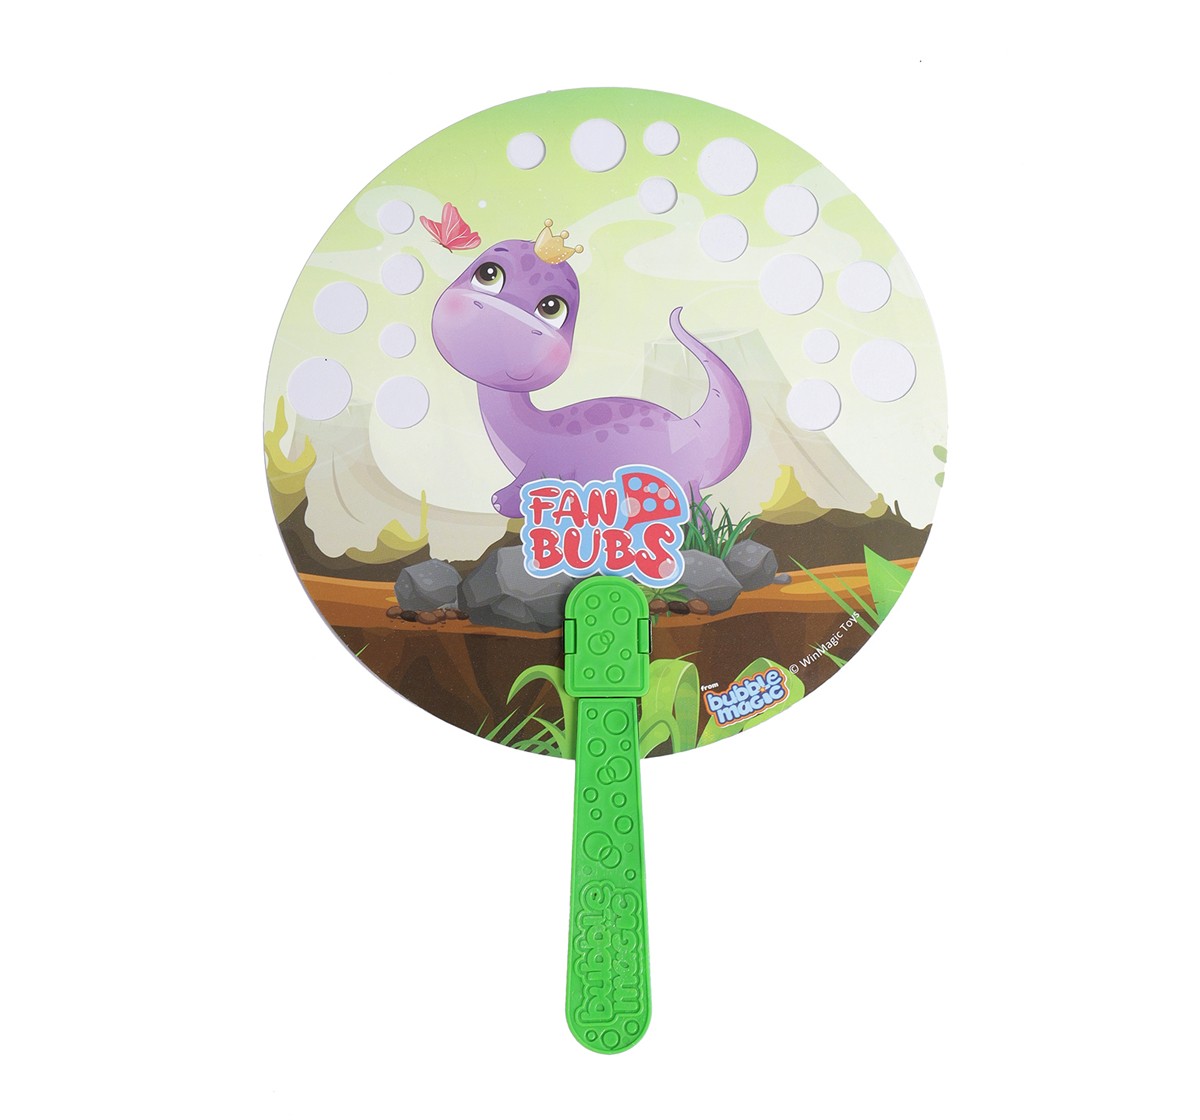 Bubble Magic Fan Bubs Dinosaur, for The Kids 3 Years and Above